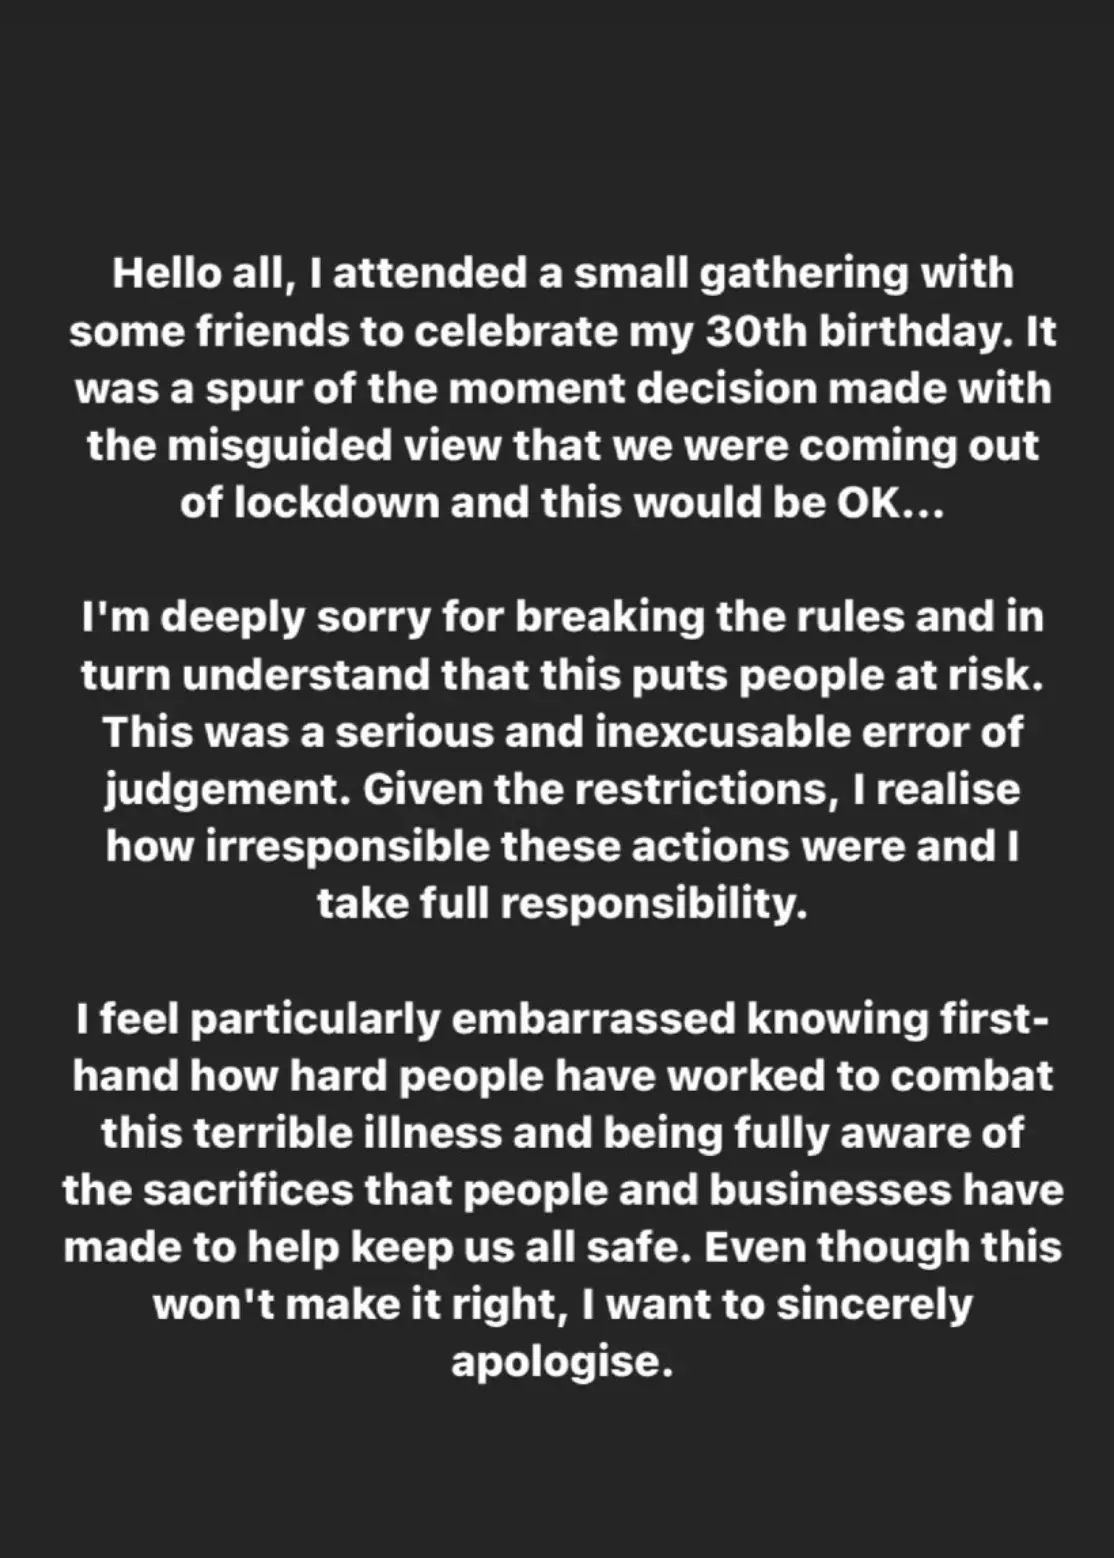 Rita posted the apology on Instagram (